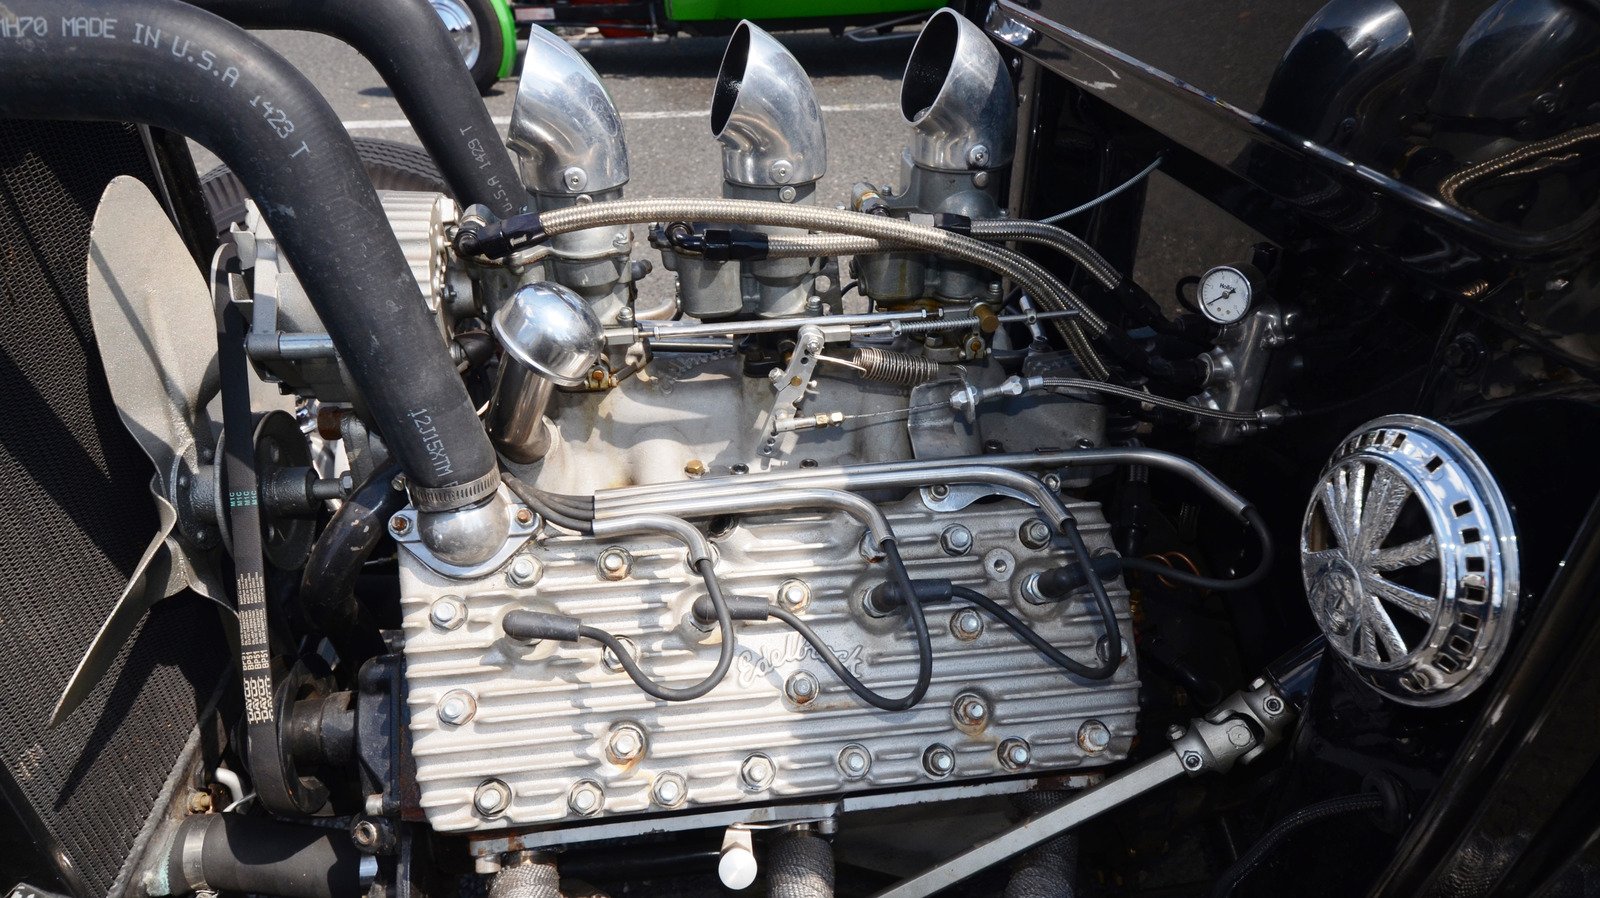 Here's What Made Ford's Flathead V8 Engine So Special